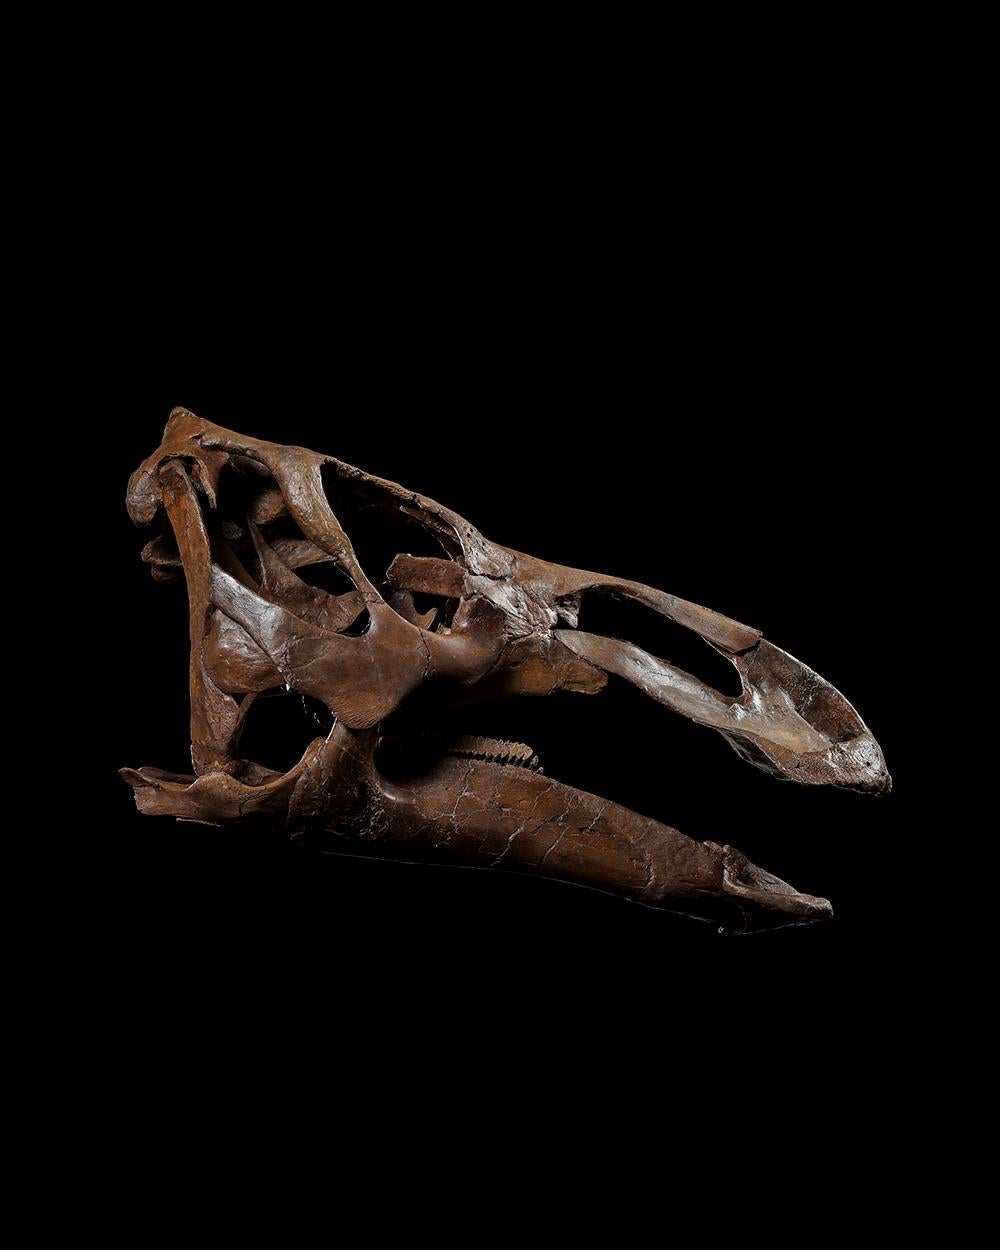 An impressive skull of an Edmontosaurus, a large herbivorous dinosaur that lived during the Late Cretaceous period, 68-66 million years ago. The three rows of sixty or more teeth on either side of the jaw, known as the ‘dental battery’, mark the